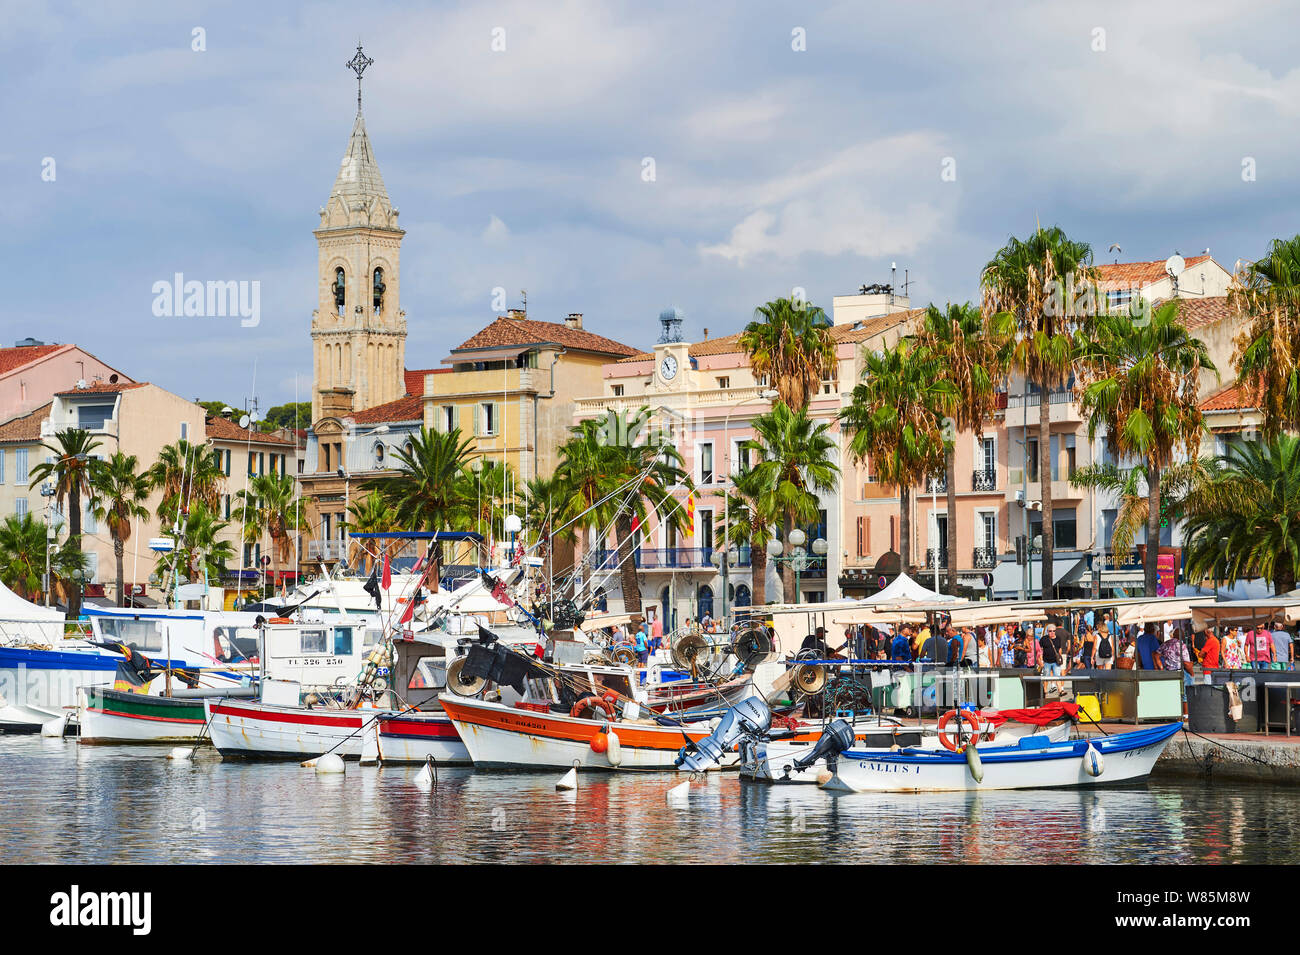 Sanary-sur-Mer (south-eastern France): the harbour. In the background, buildings bordering the quay “Quai Charles de Gaulle” in the town centre. On th Stock Photo